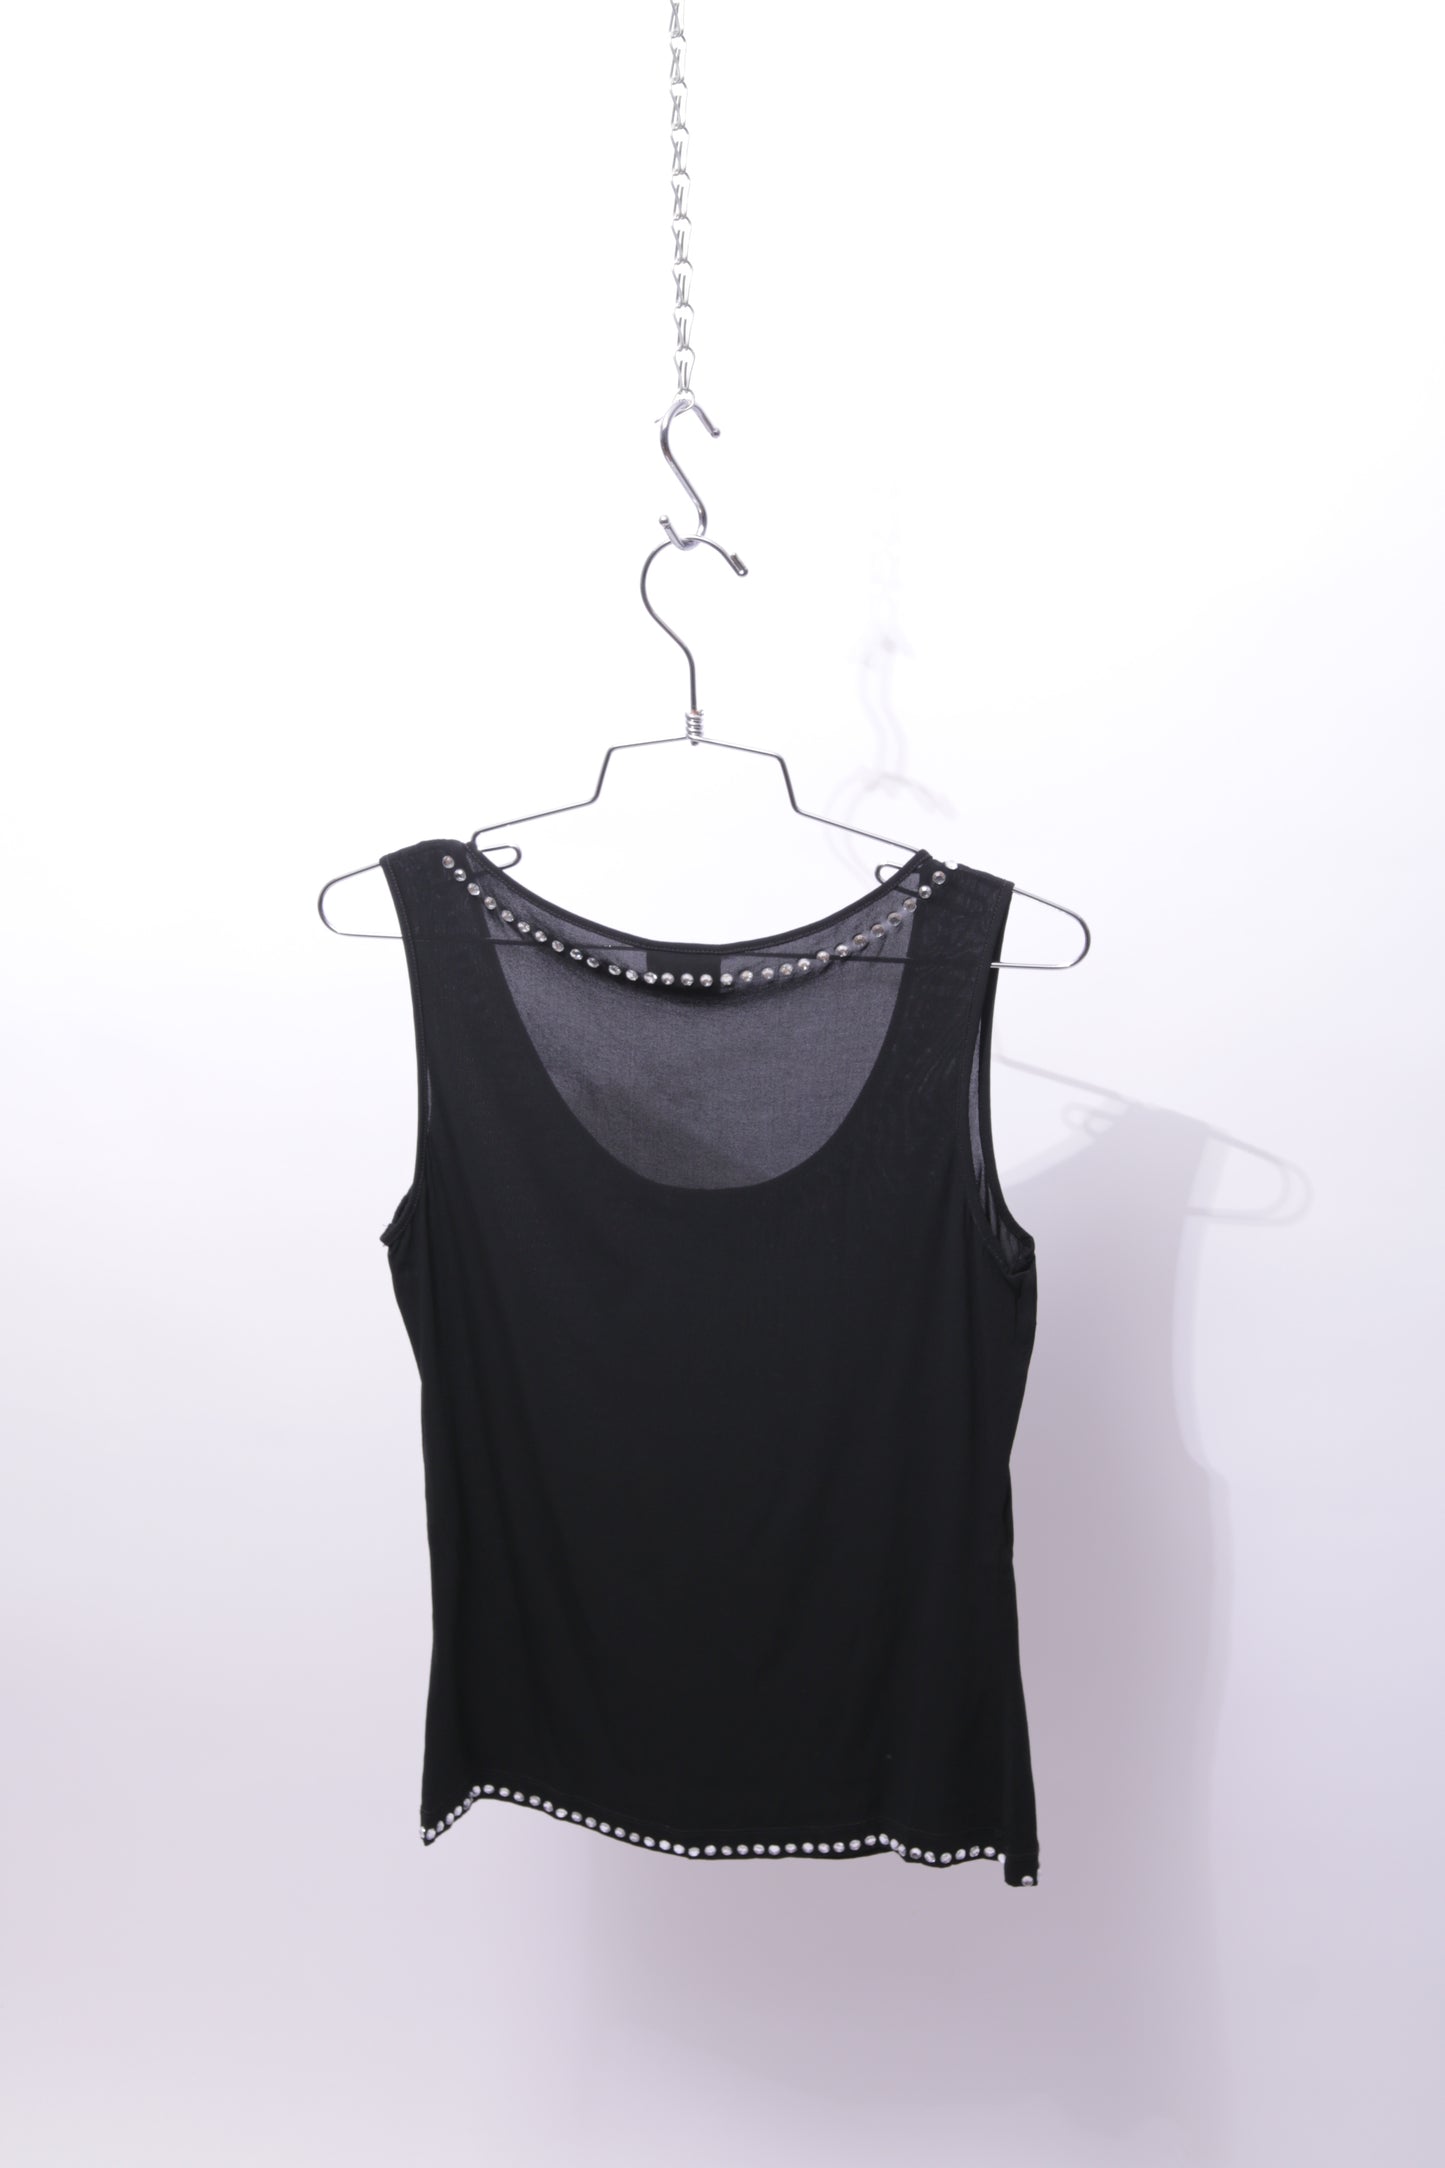 D&G black sheer top with rhinestones around the neck line